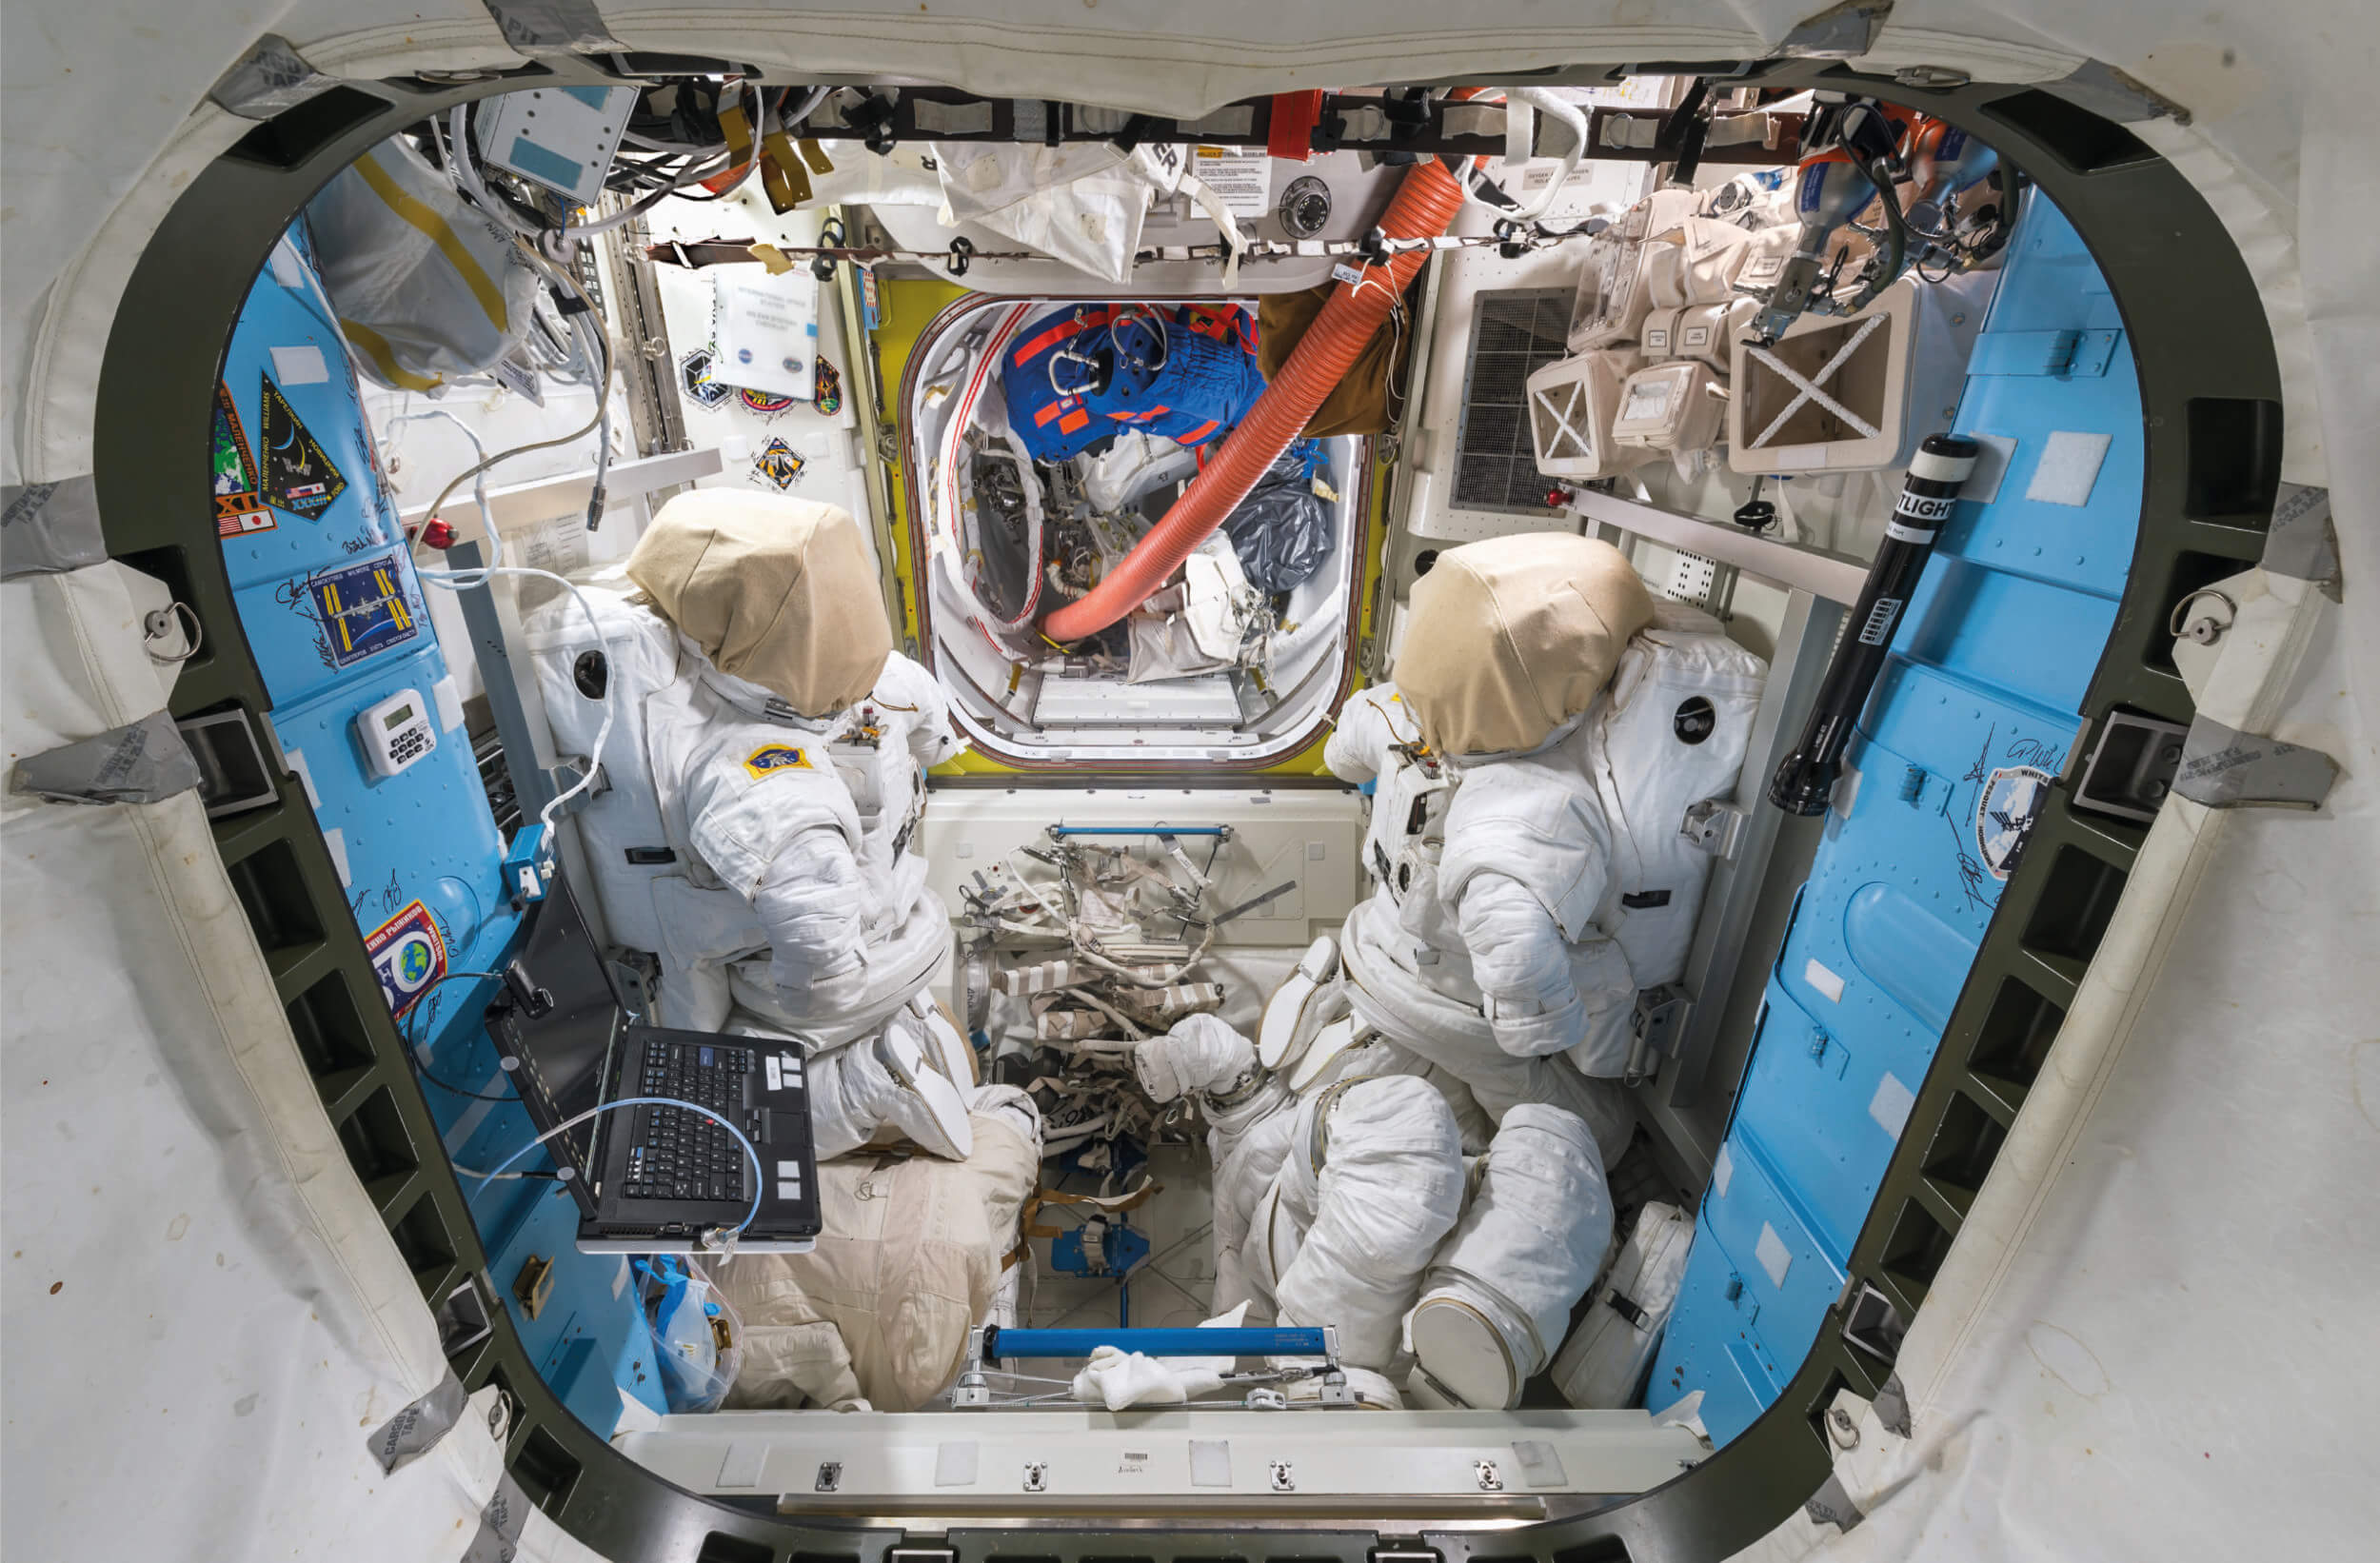 The equipment storage area of the ISS’s Quest, the main airlock and departure point for spacewalks, 2017